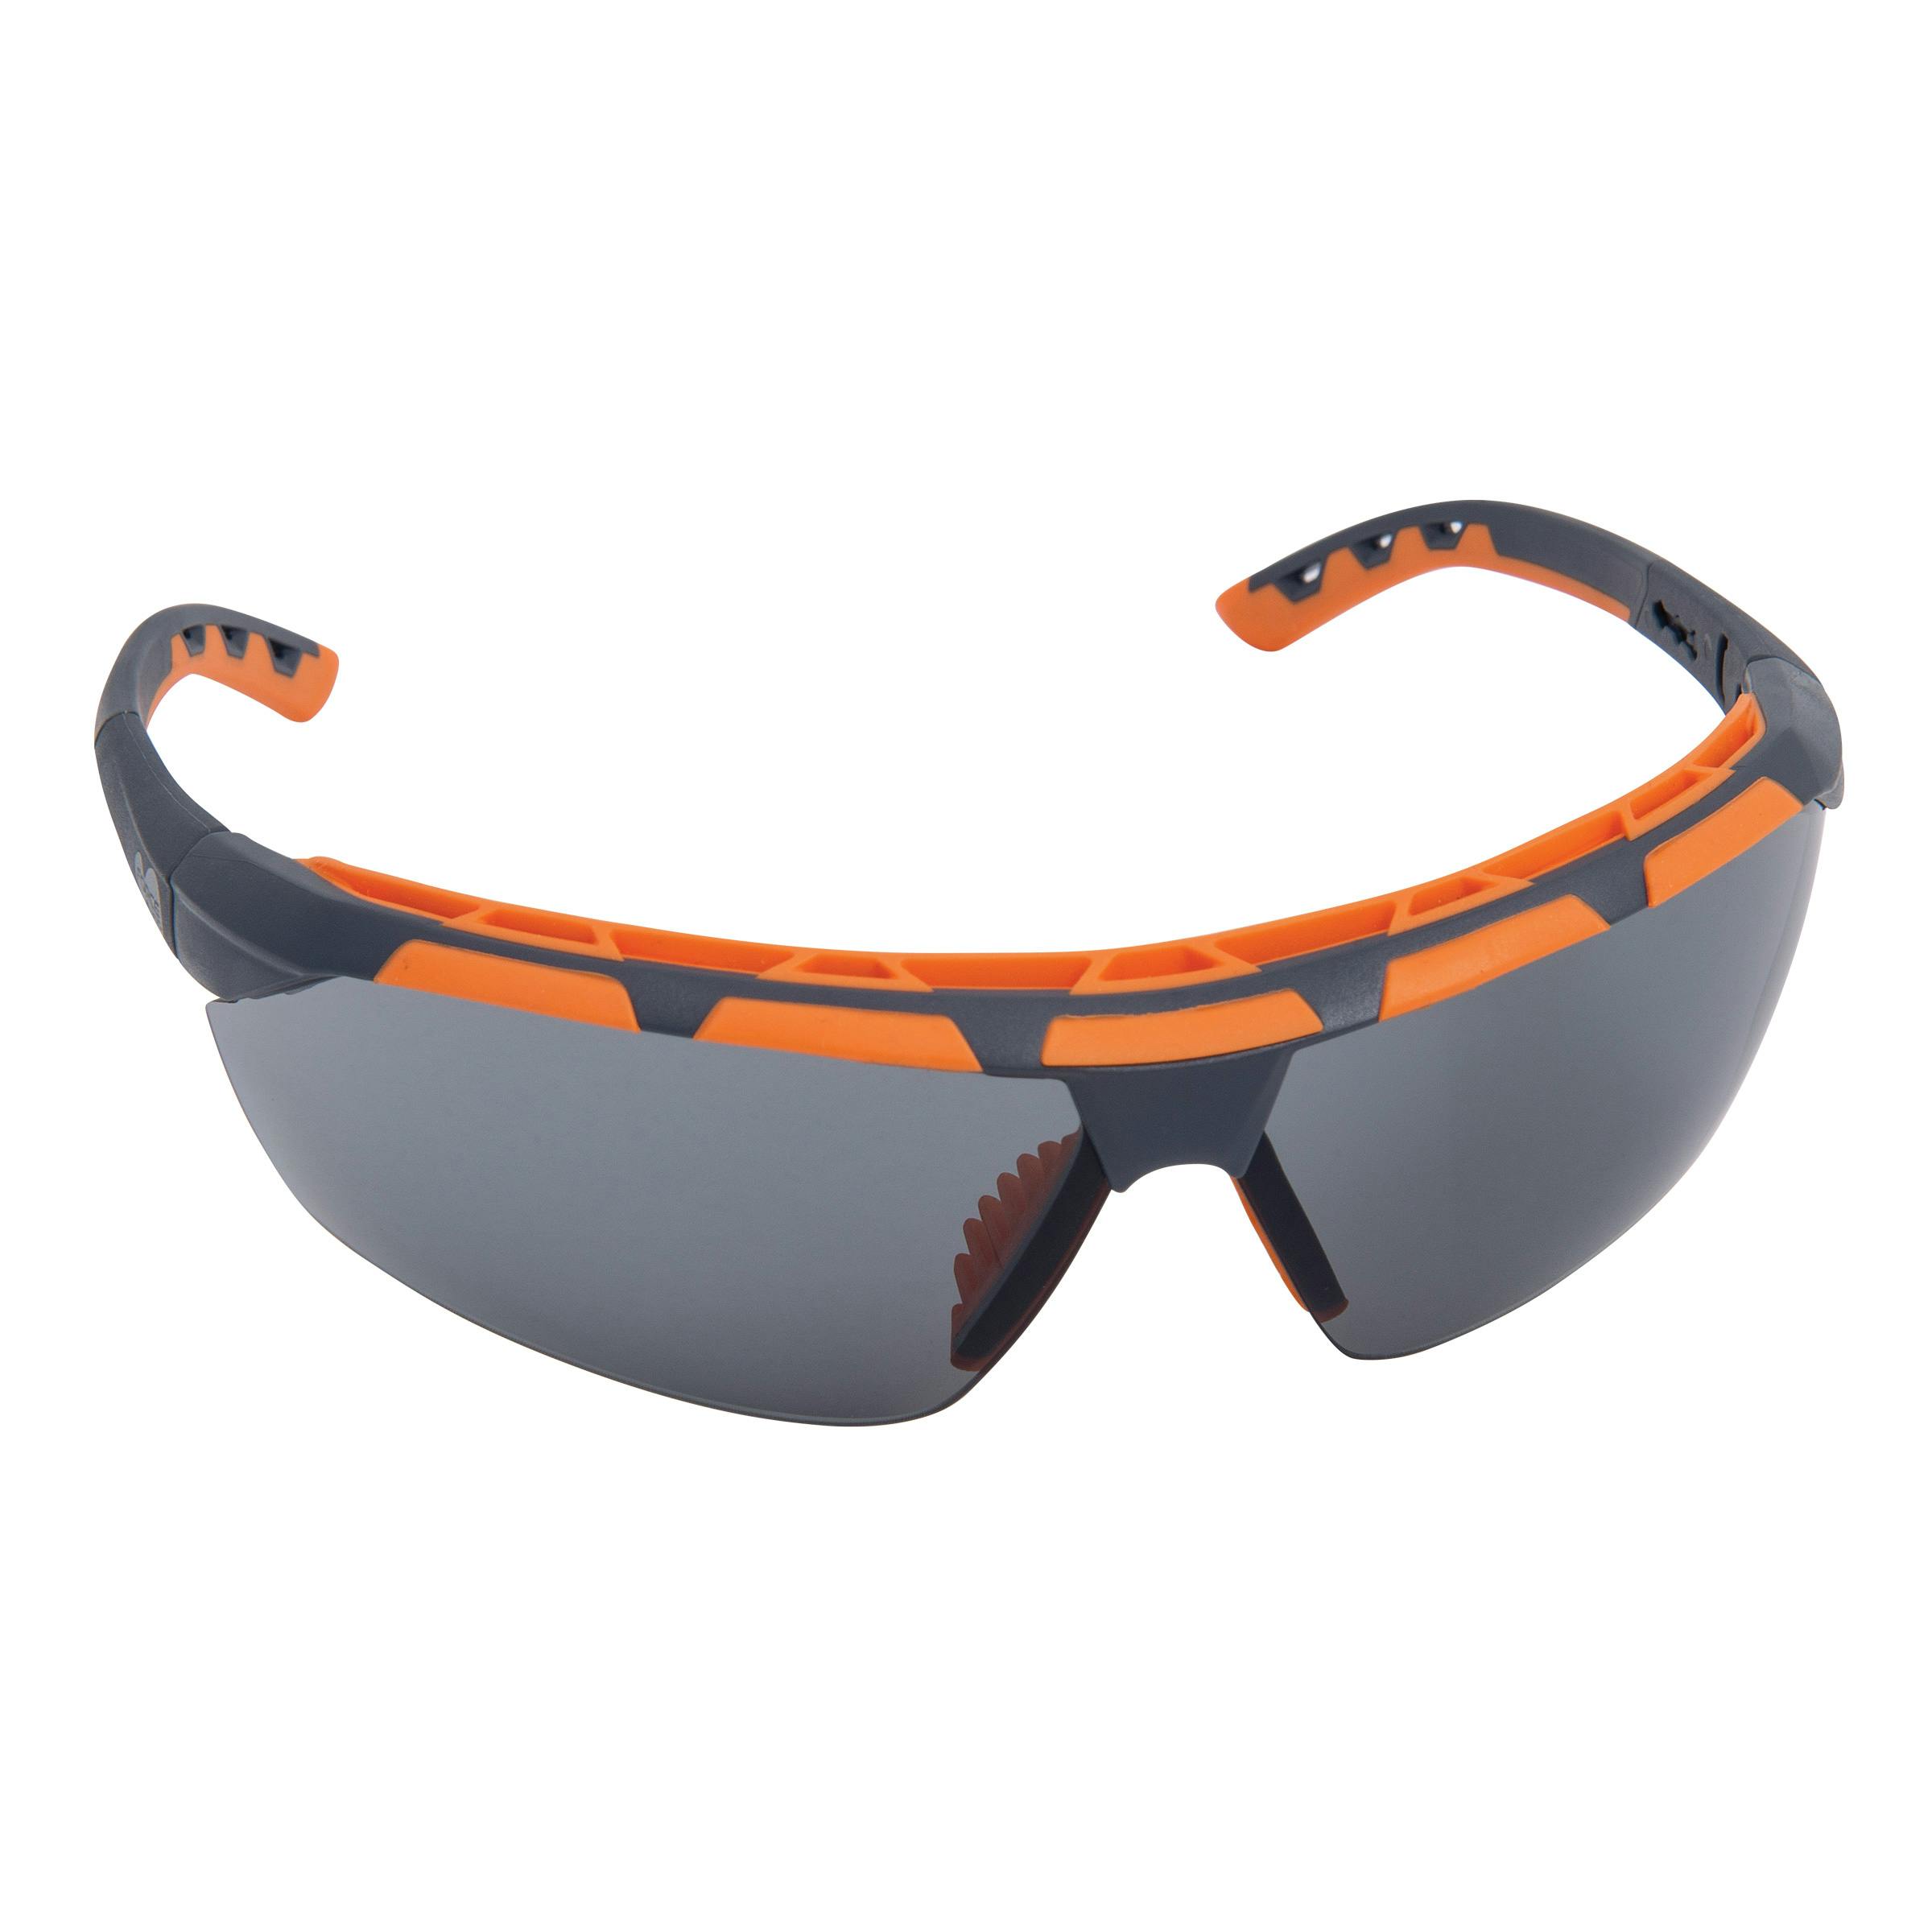 Force360 Calibr8 Safety Spectacle